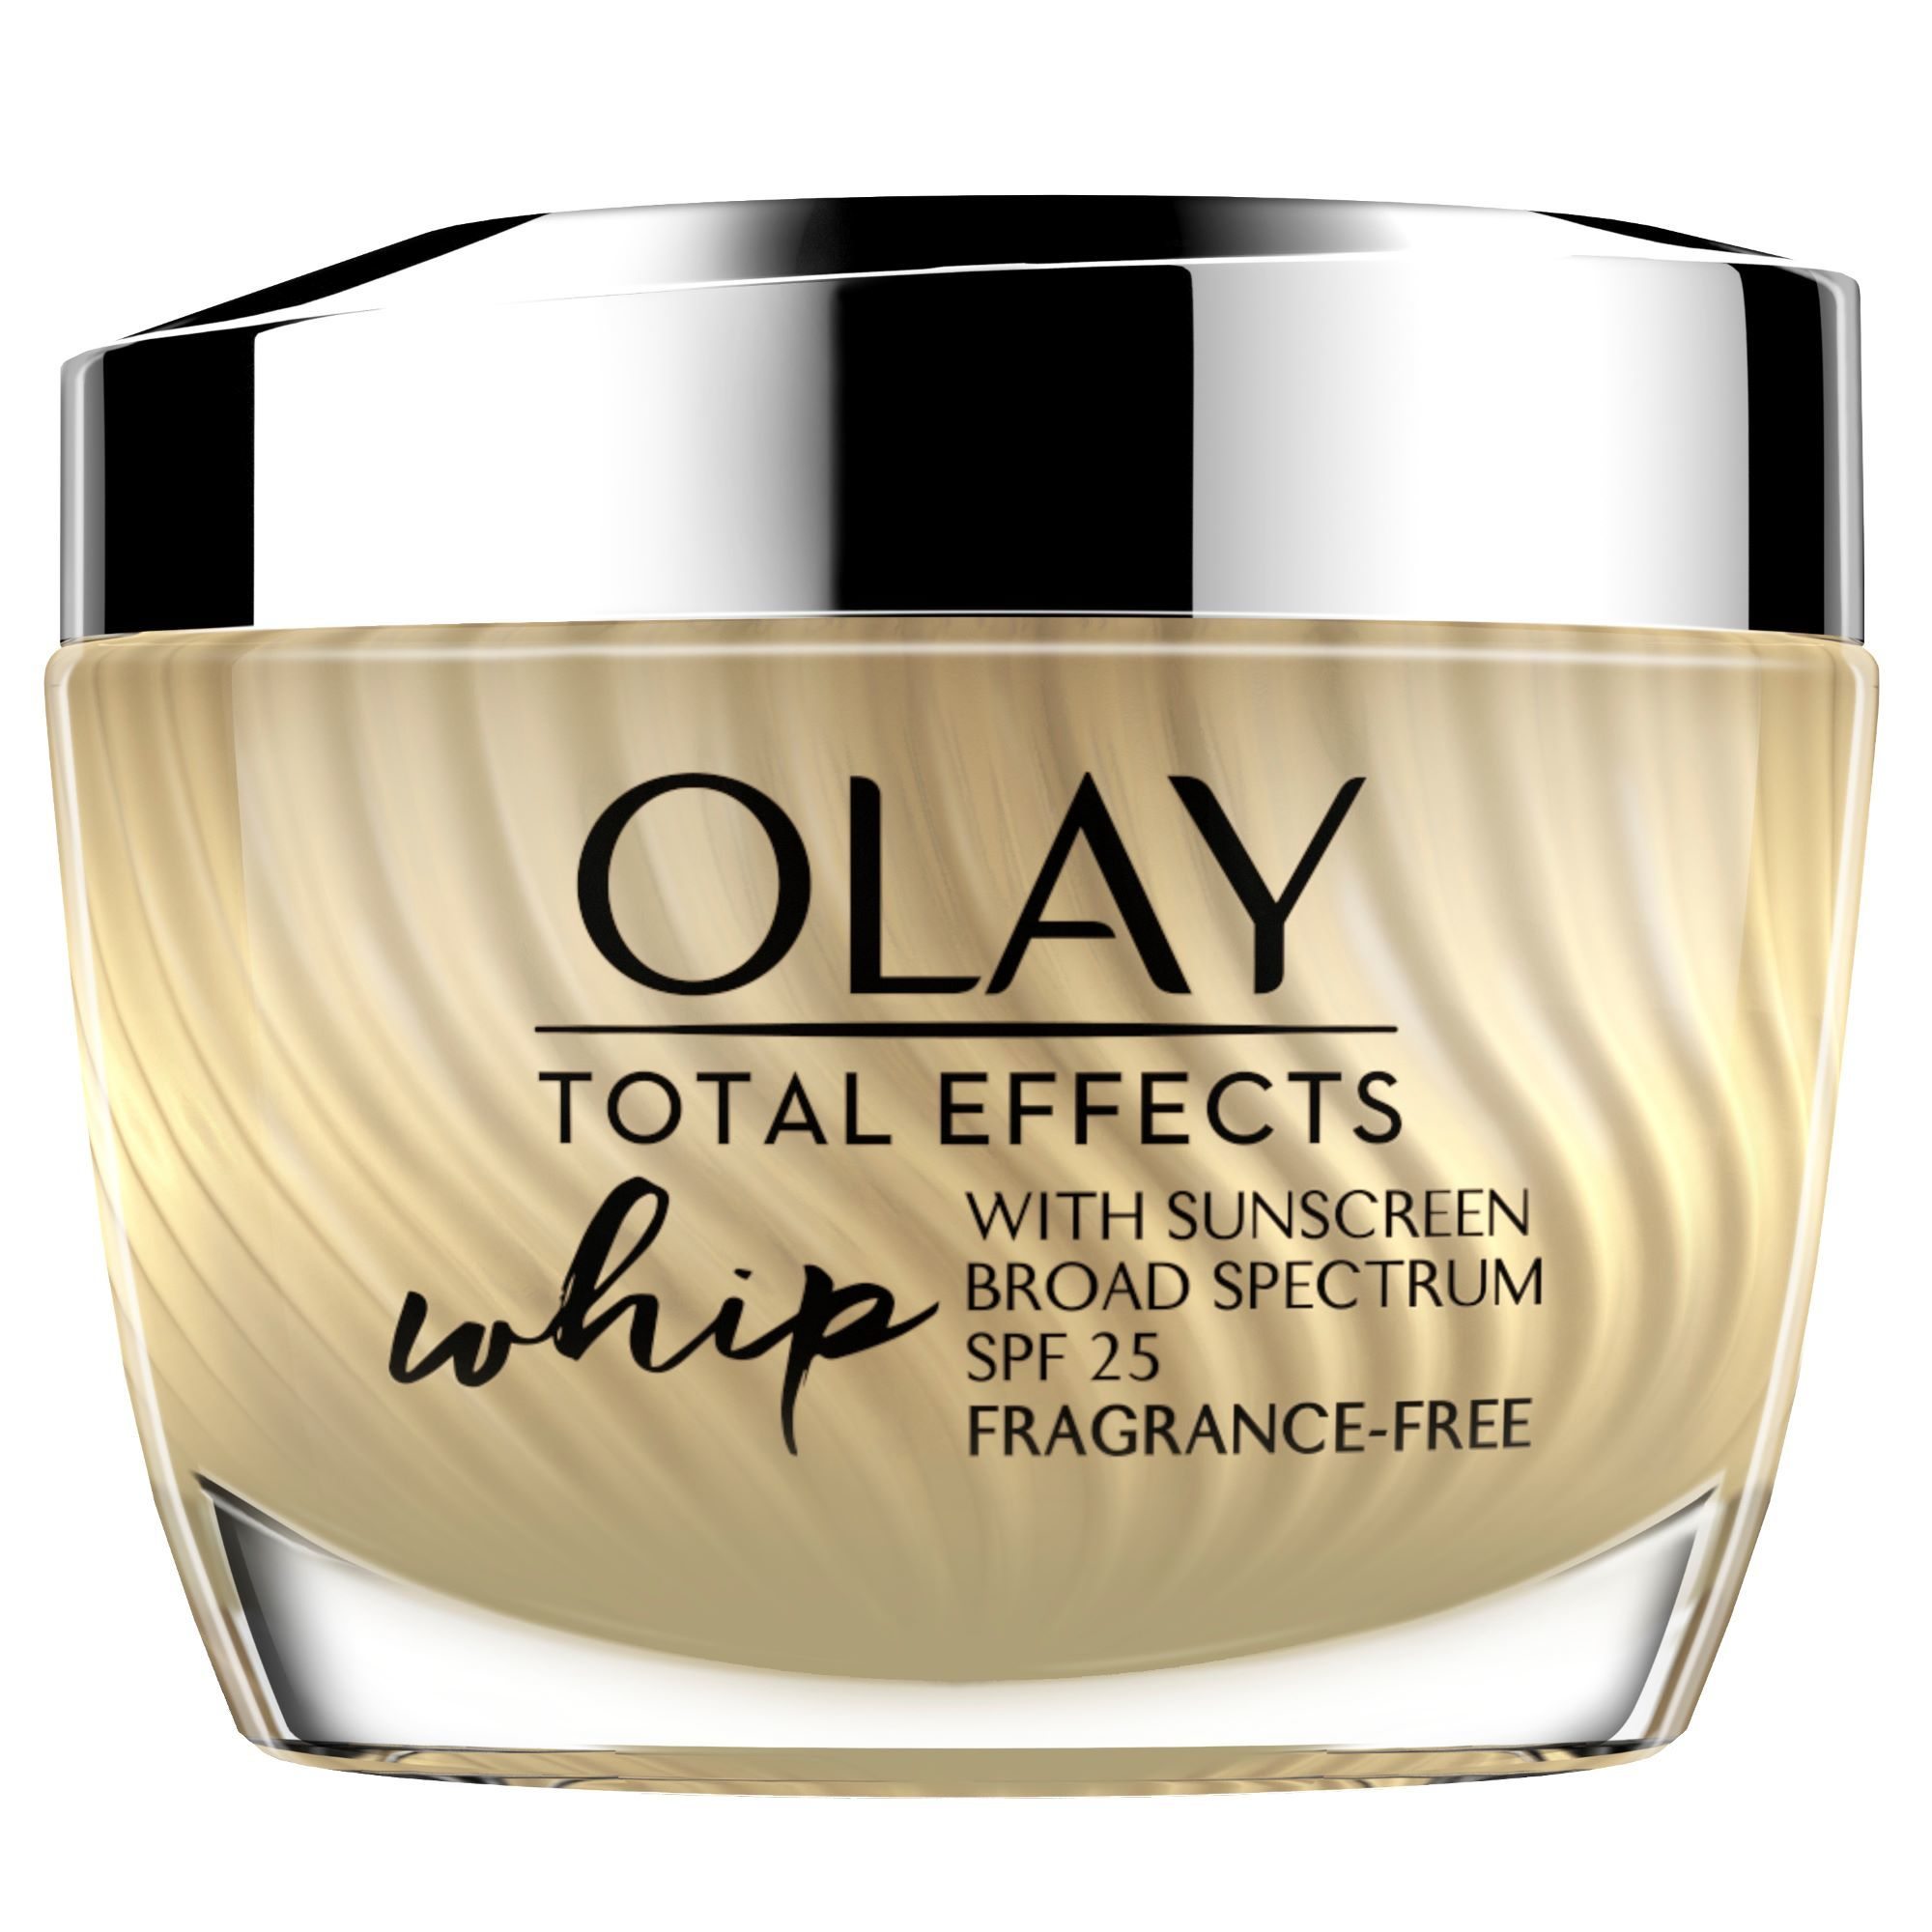 Olay Total Effects Whip Face Moisturizer SPF 25 Fragrance-Free 1.7 oz